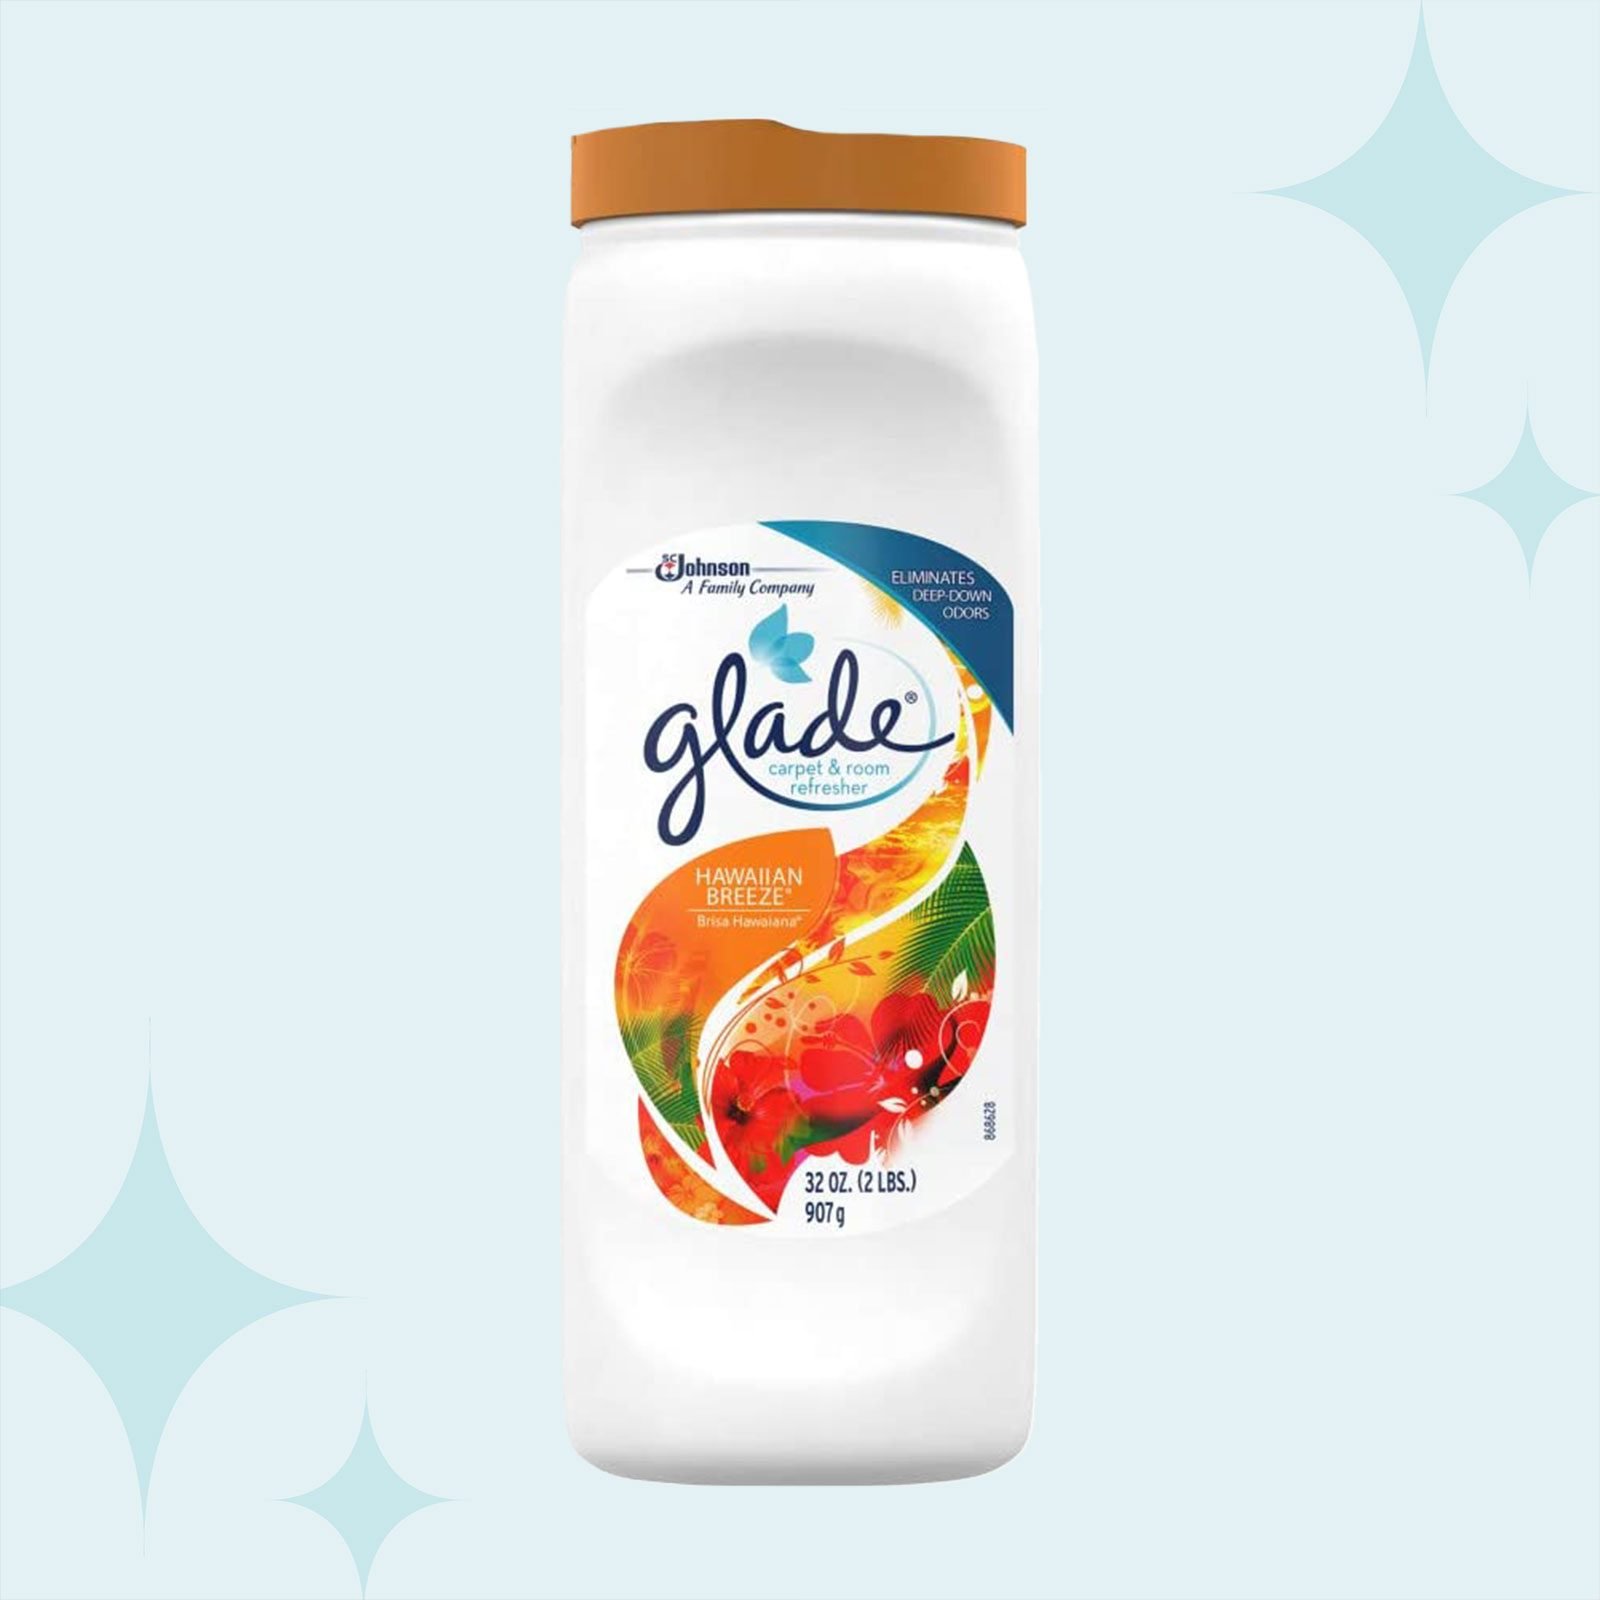 Glade Carpet and Room Refresher, Deodorizer for Home, Pets, and Smoke